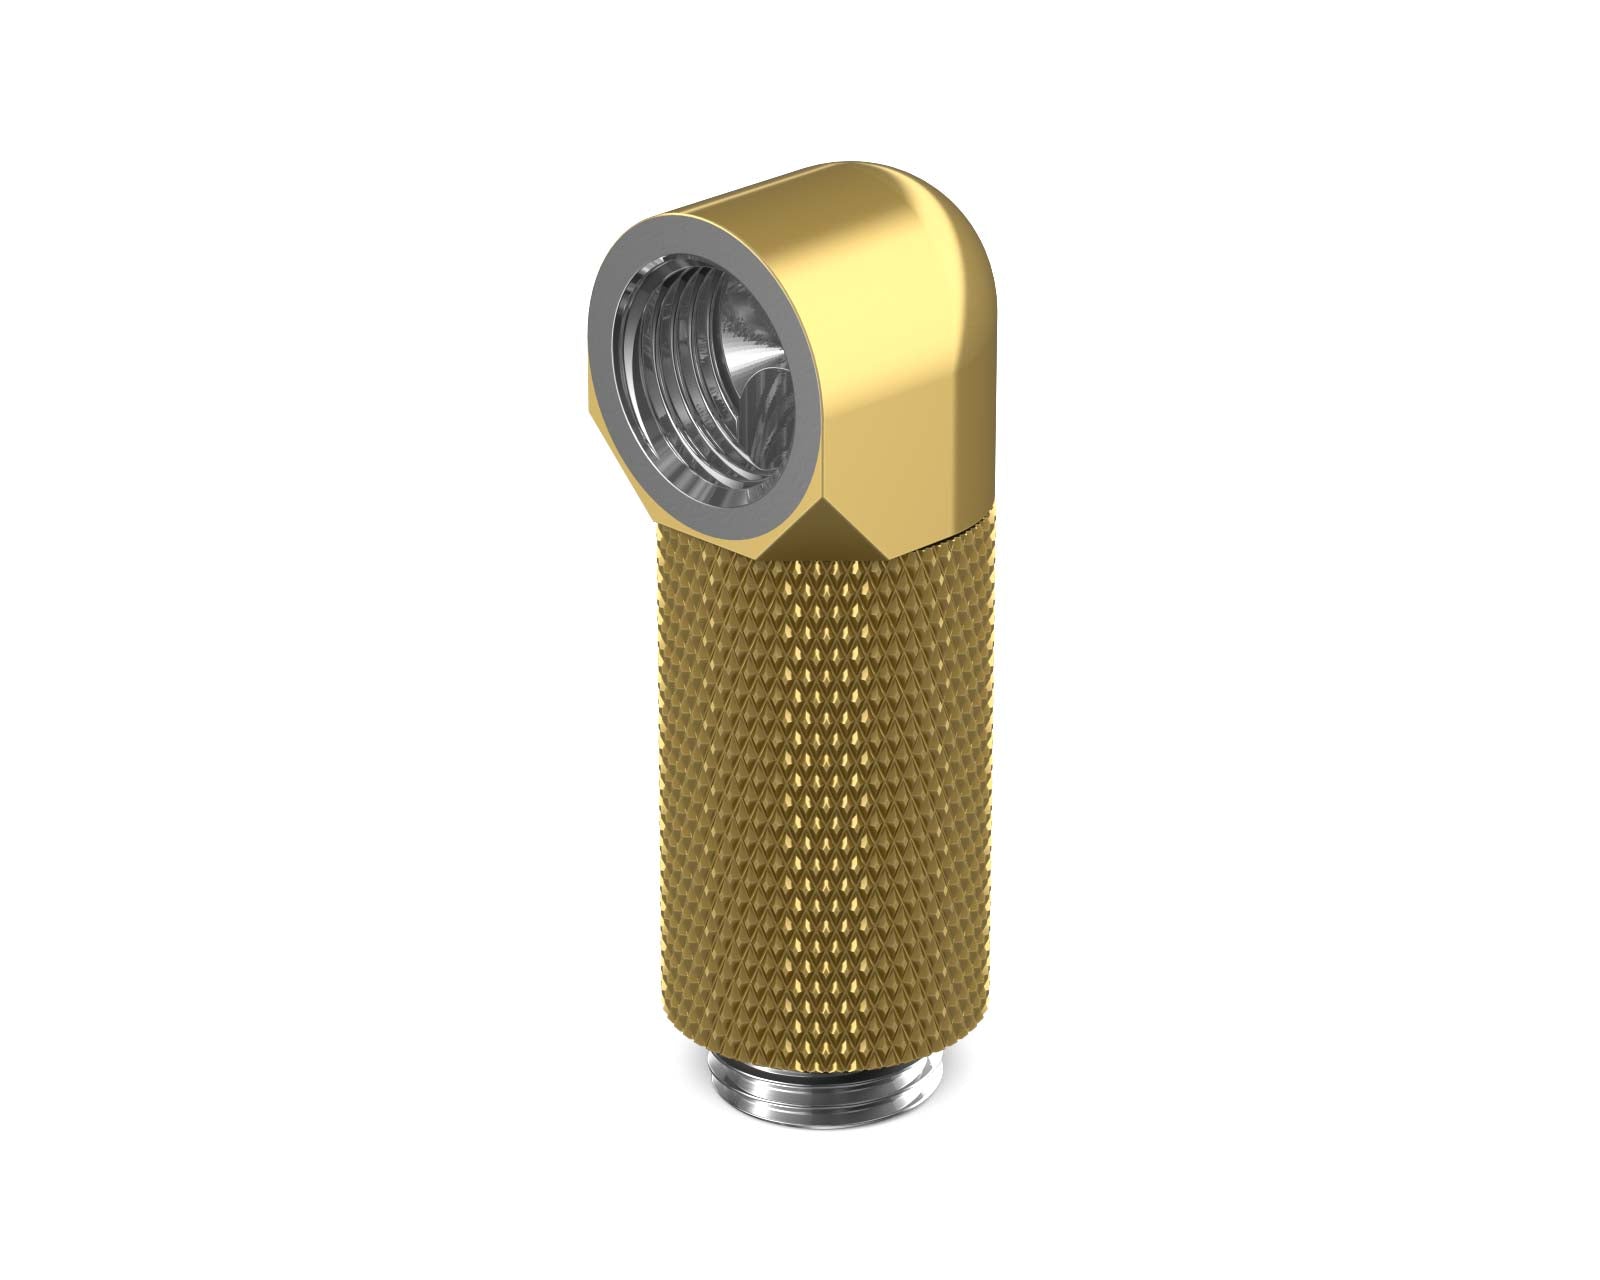 PrimoChill Male to Female G 1/4in. 90 Degree SX Rotary 30mm Extension Elbow Fitting - PrimoChill - KEEPING IT COOL Candy Gold